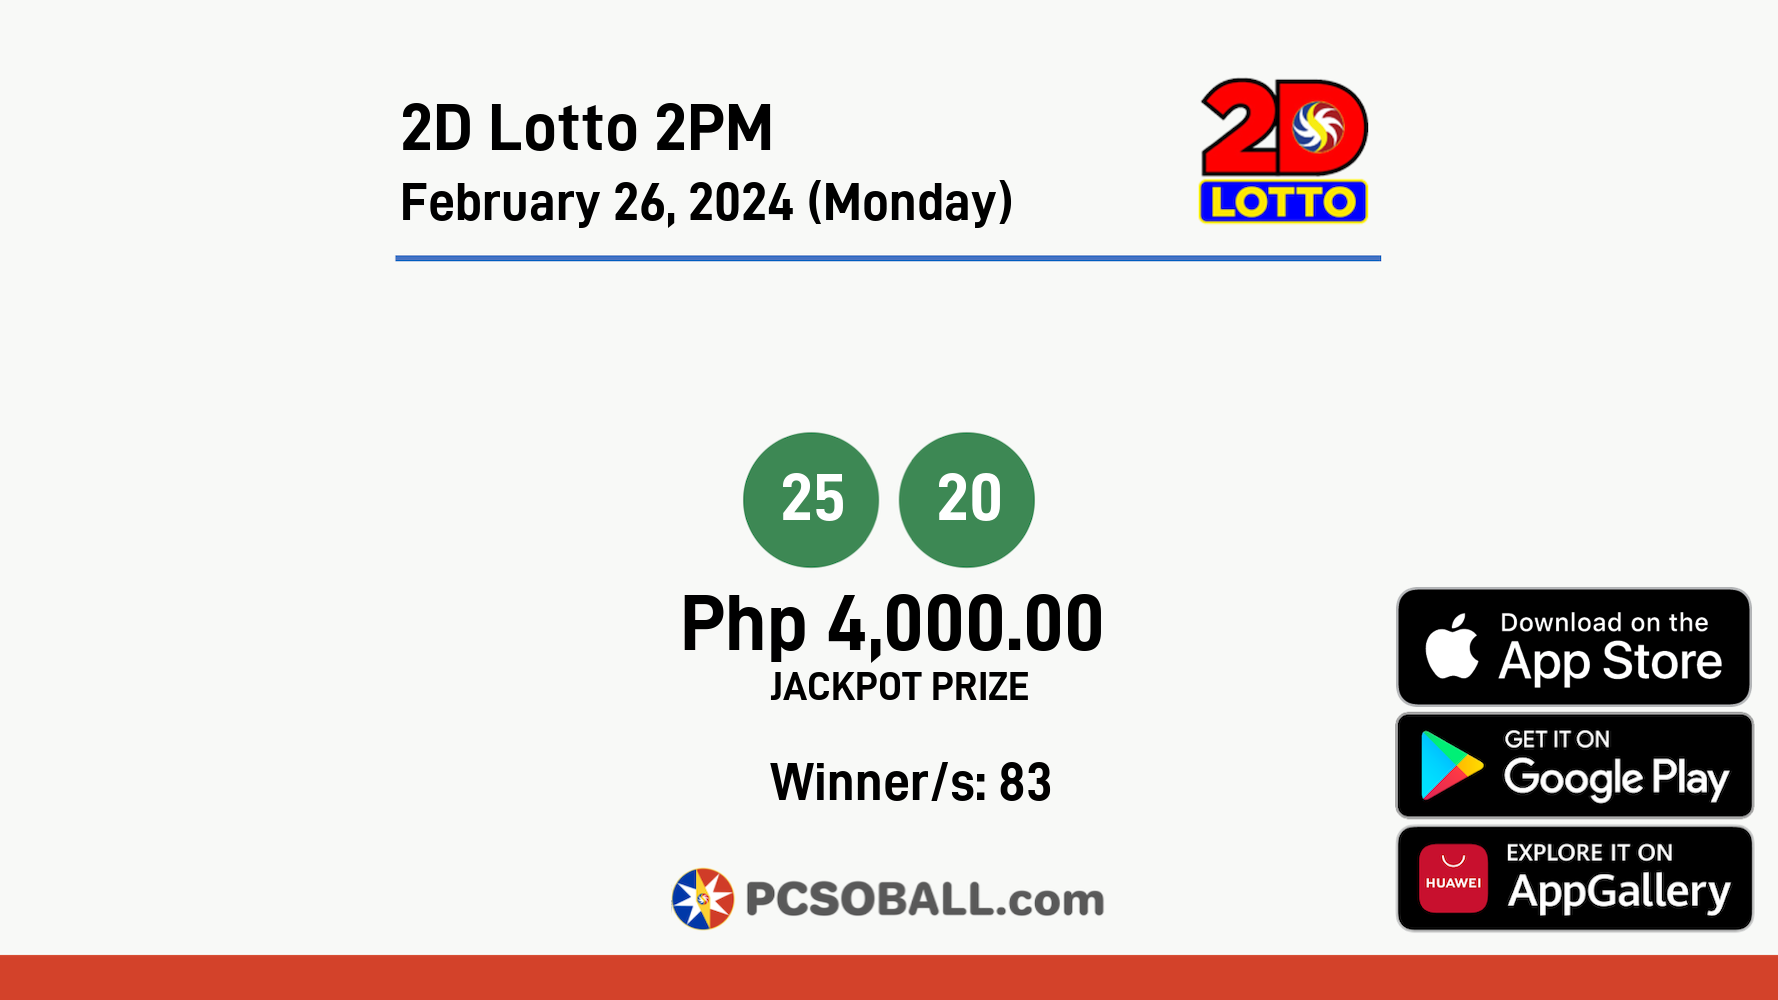 2D Lotto 2PM February 26, 2024 (Monday) Result